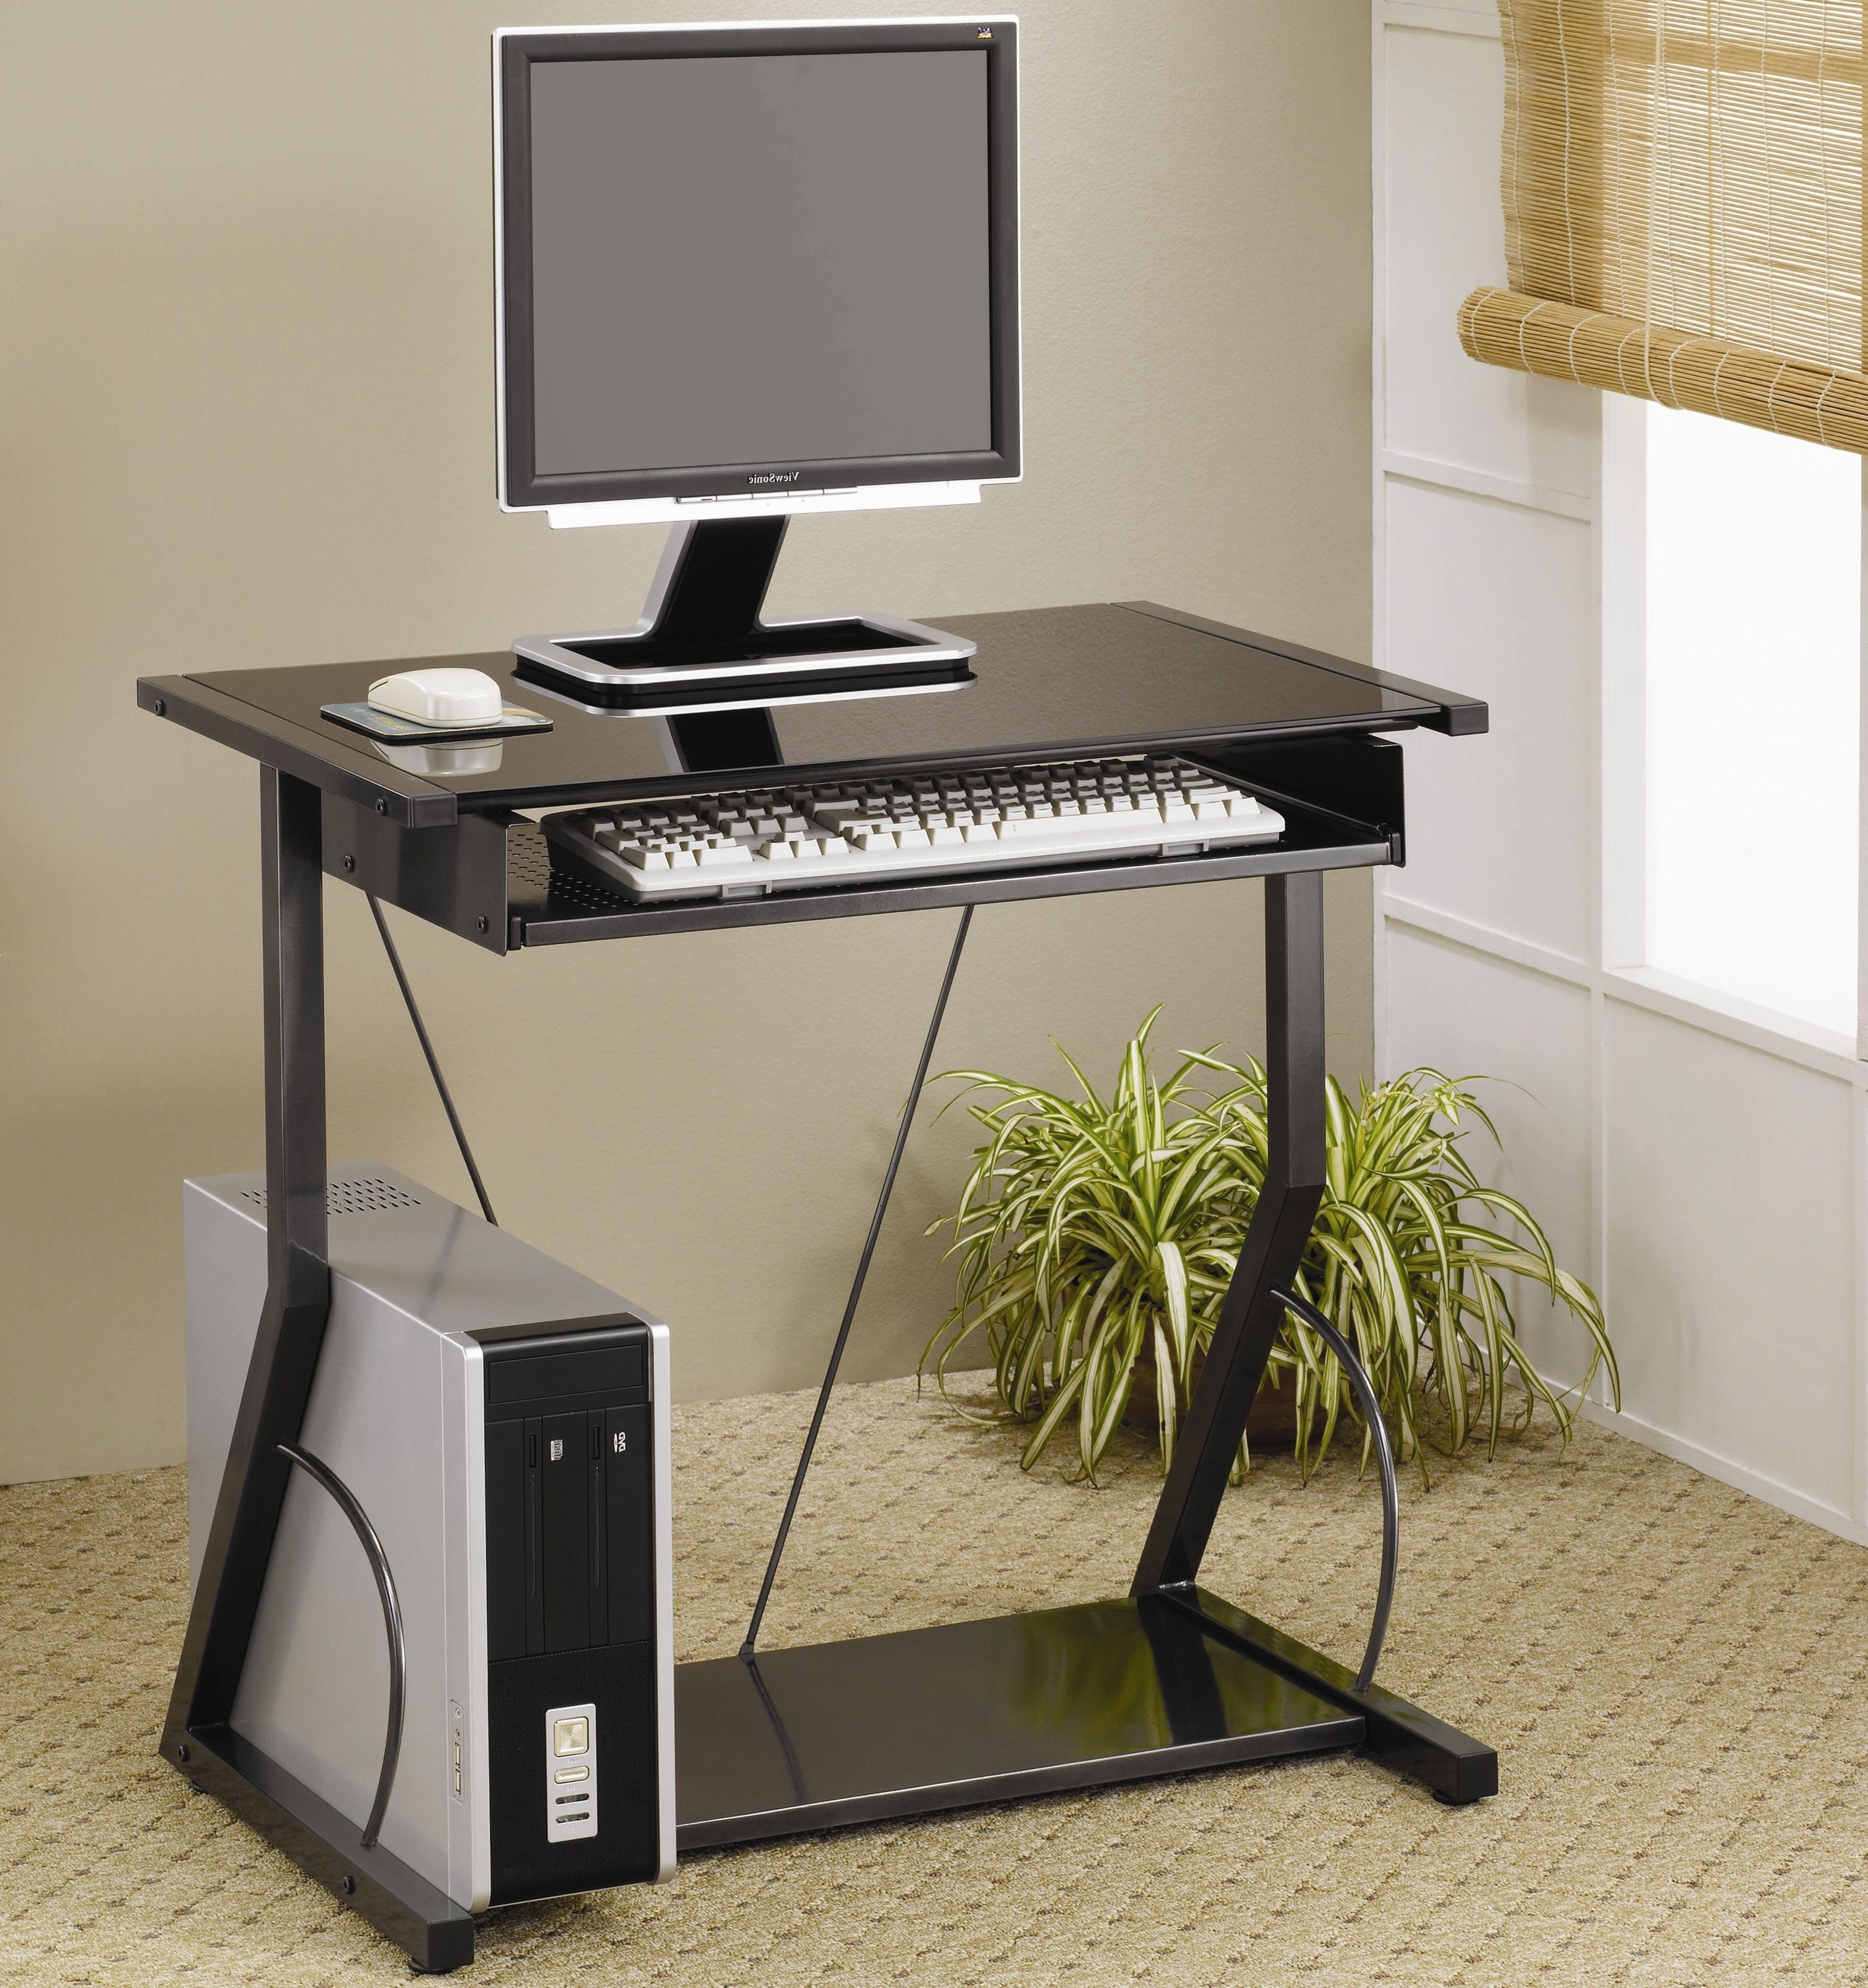 Most Current Computer Desks With Keyboard Tray Intended For Desks Contemporary Computer Desk With Keyboard Tray Lowest Price (View 1 of 20)